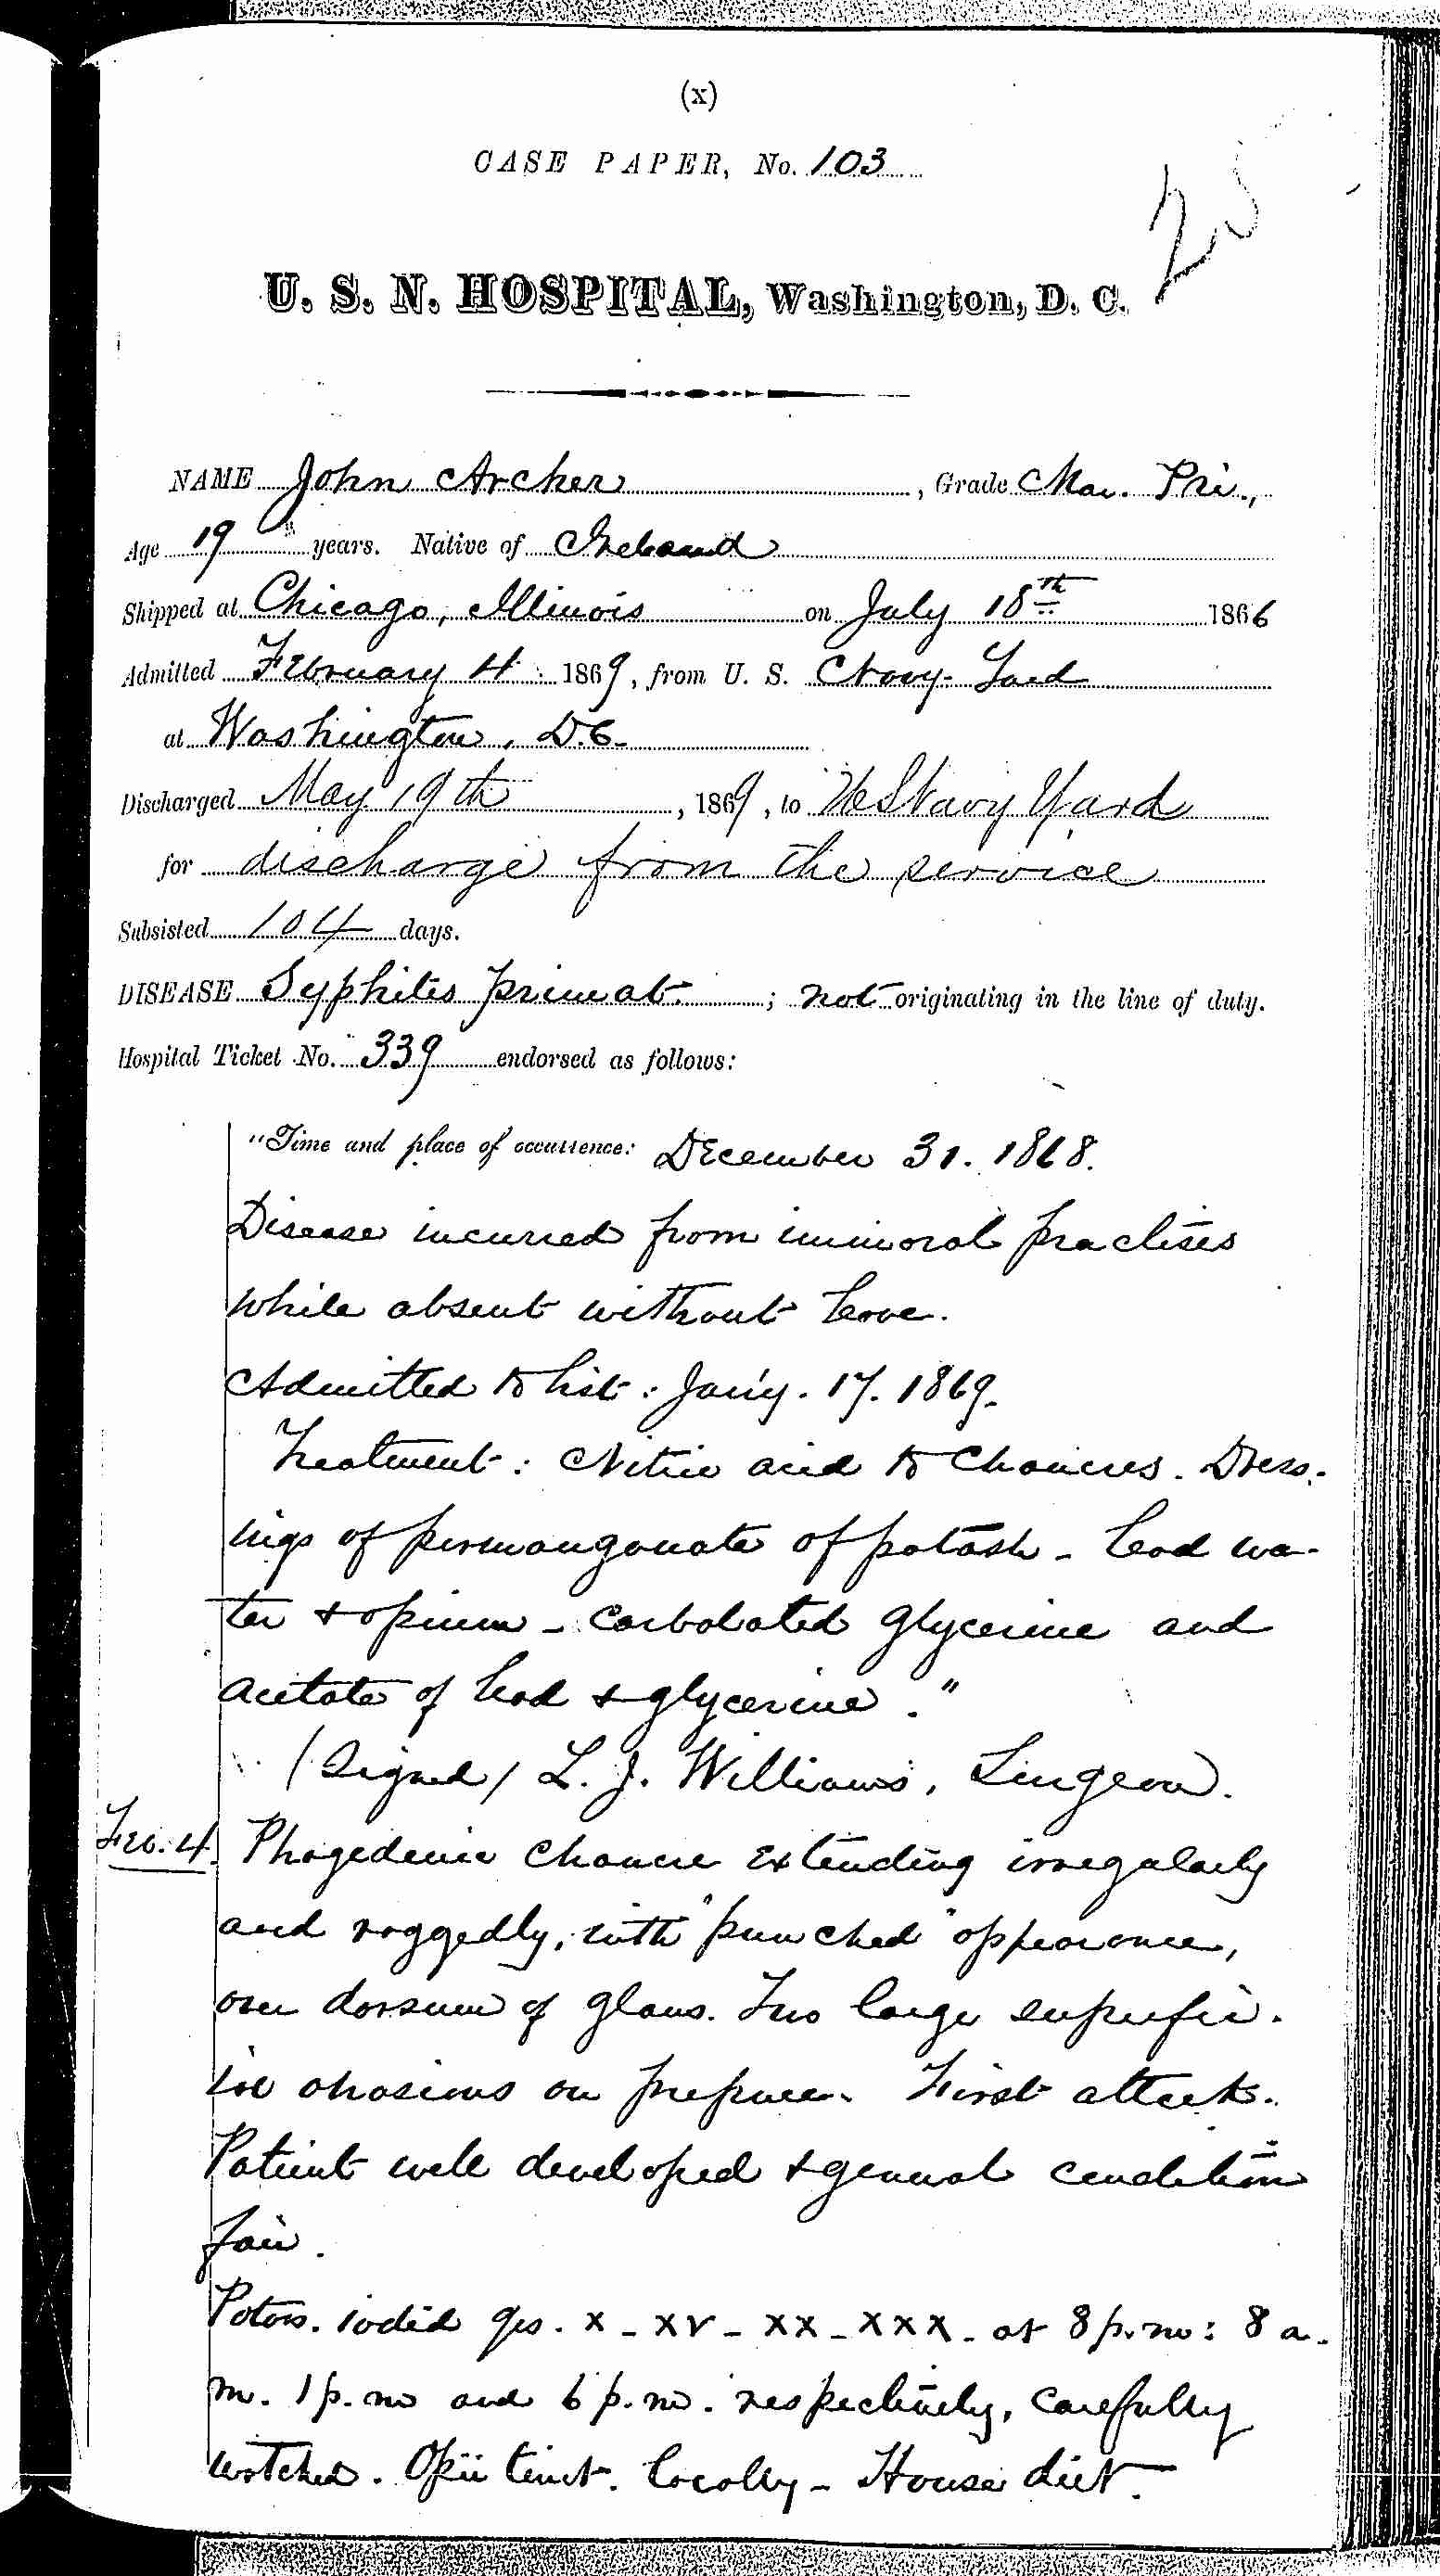 Entry for John Archer (page 1 of 5) in the log Hospital Tickets and Case Papers - Naval Hospital - Washington, D.C. - 1868-69